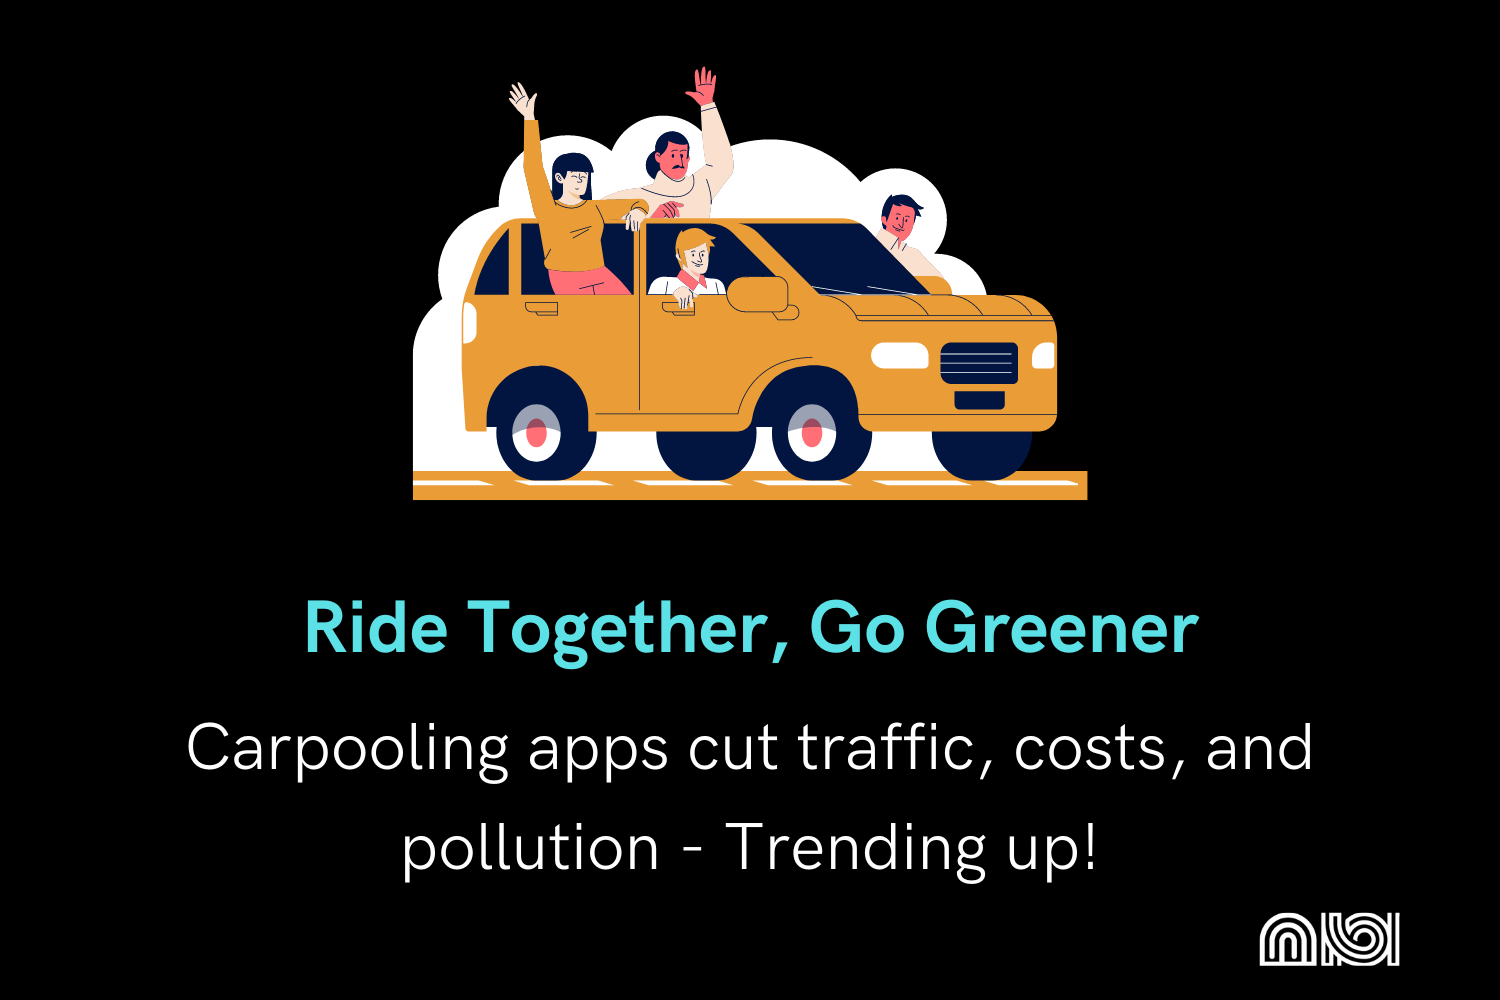 Carpooling app usage rises, reducing traffic, costs, and pollution. Embracing eco-friendly commuting.